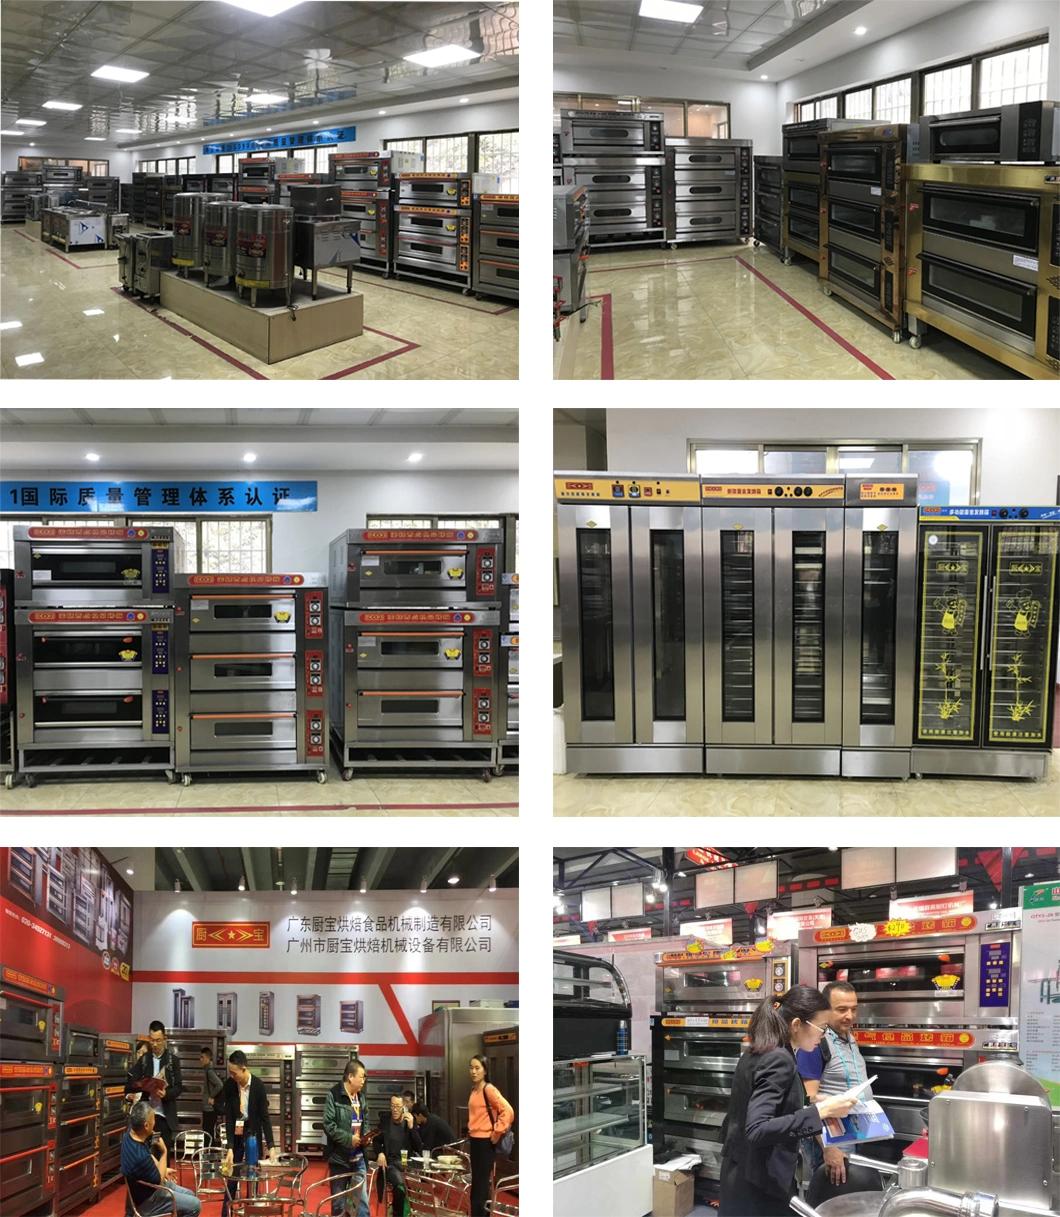 3 Deck 9 Trays Electric Pizza Oven for Food Oven Commercial Equipment Bakery Machine Baking Machinery